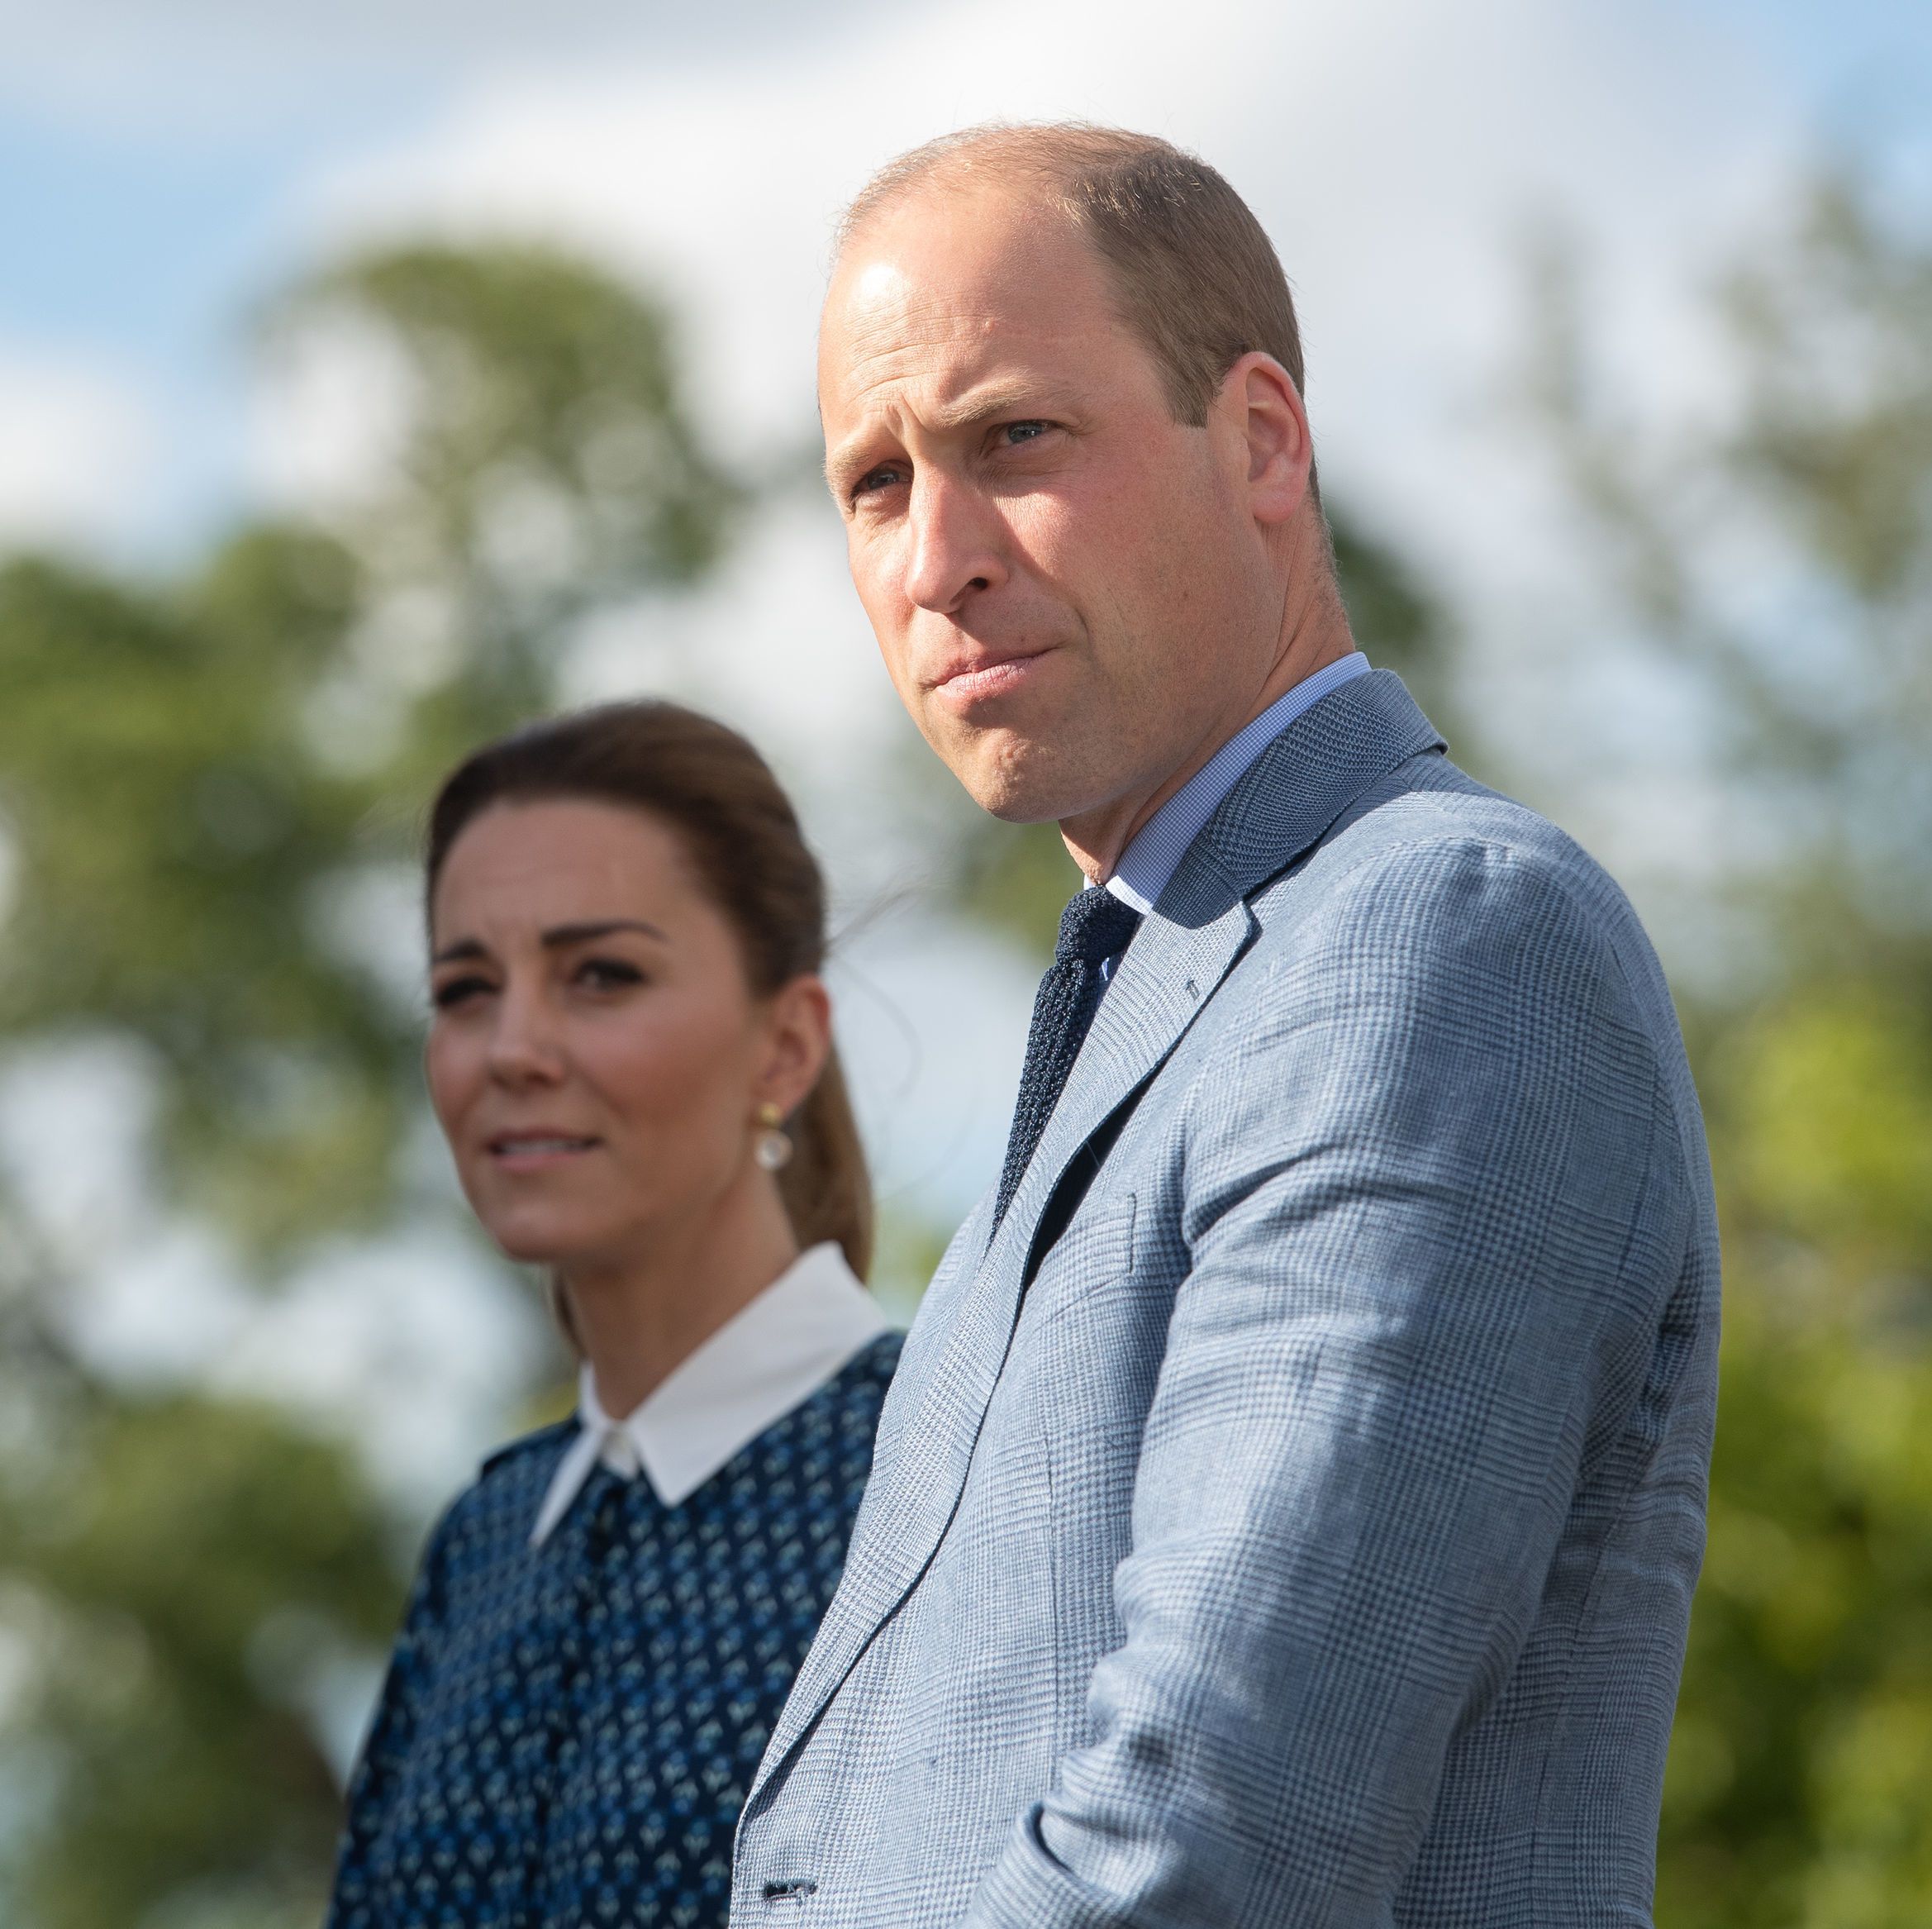 Prince William and Kate Middleton's New Home Was the Location of a 